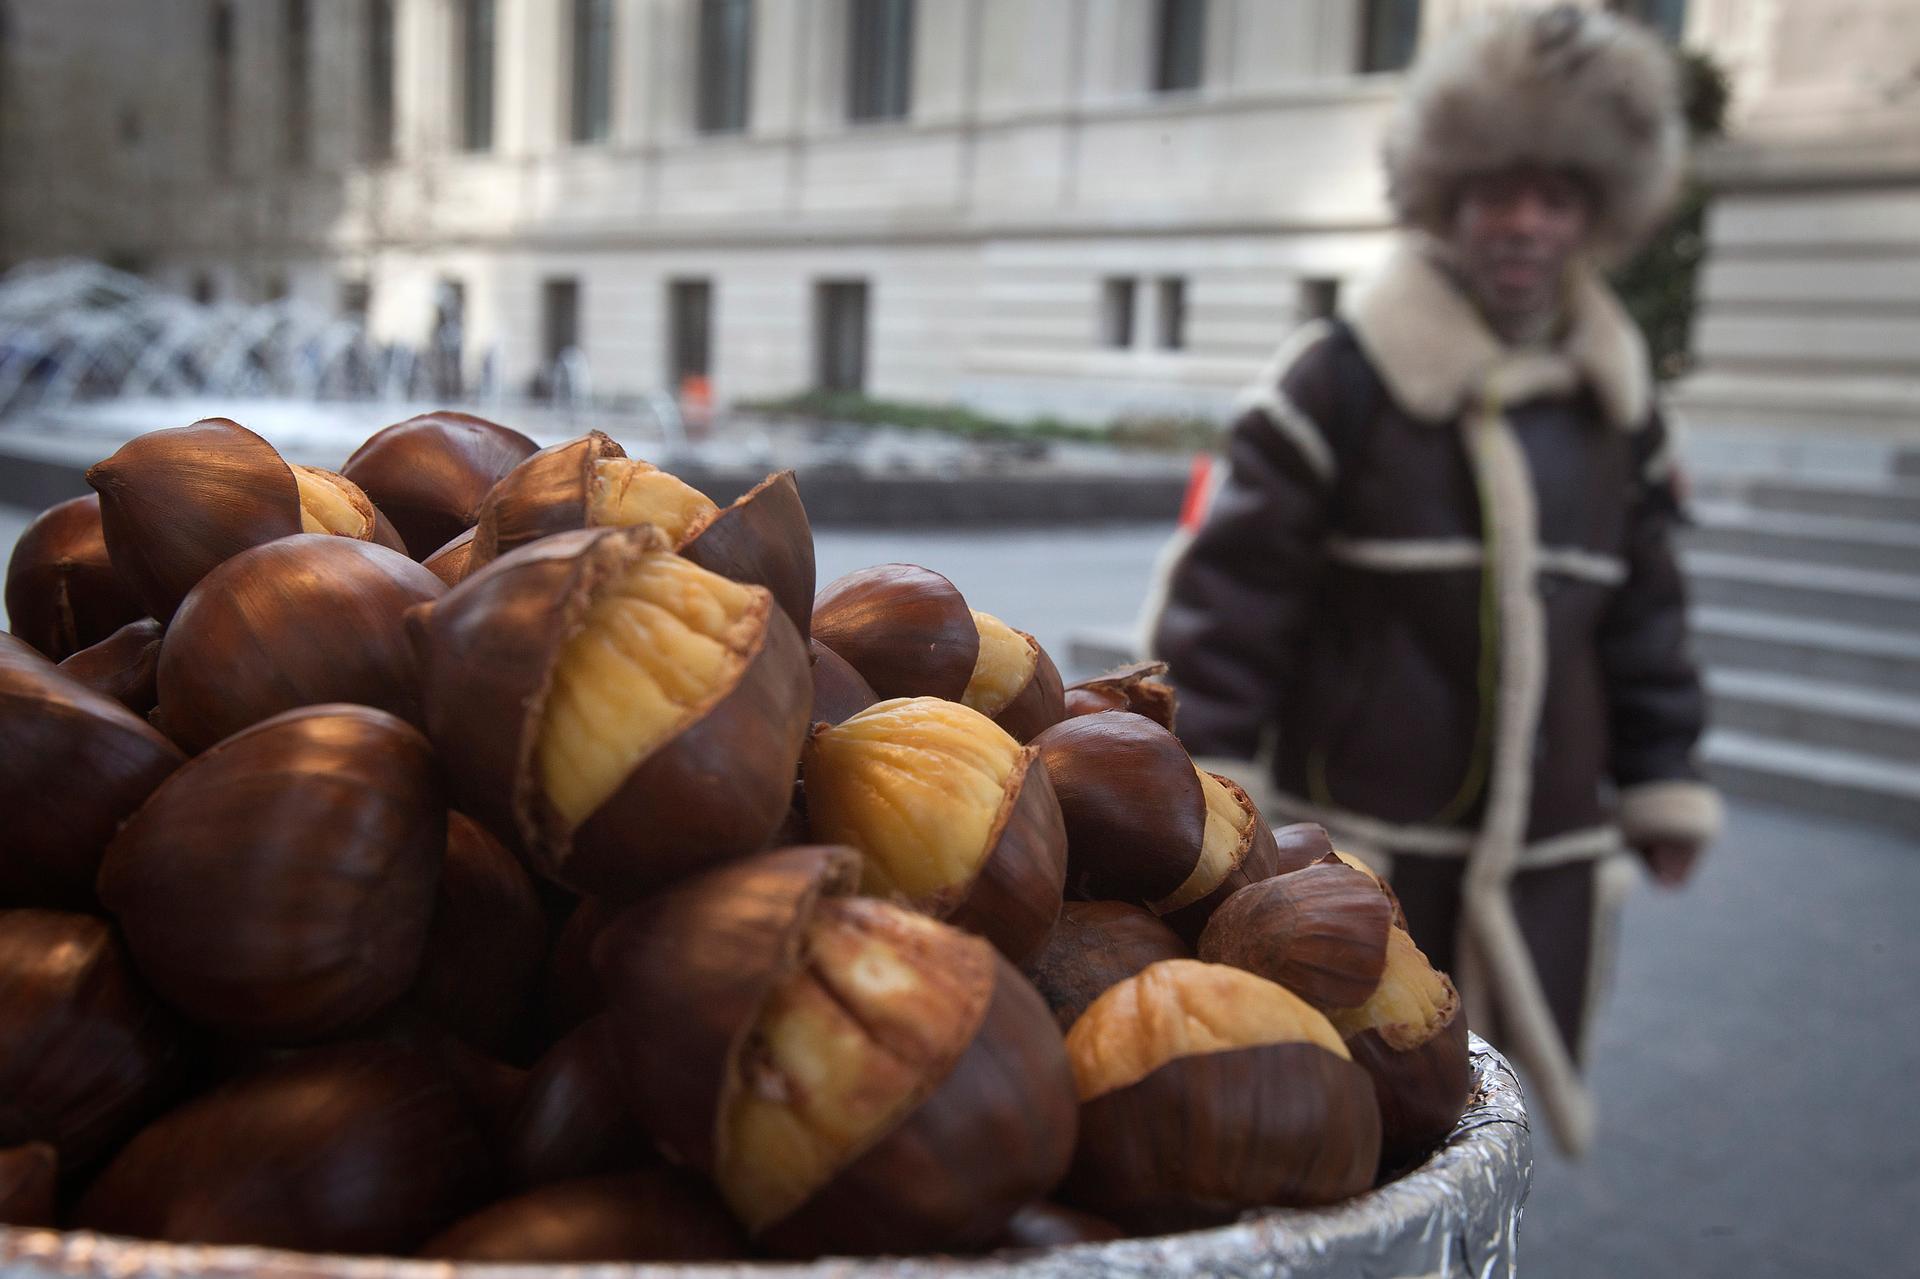 A man, bundled up against the cold, walks past a street vendor's chestnuts as they roast in front of the Metropolitan Museum of Art in New York.